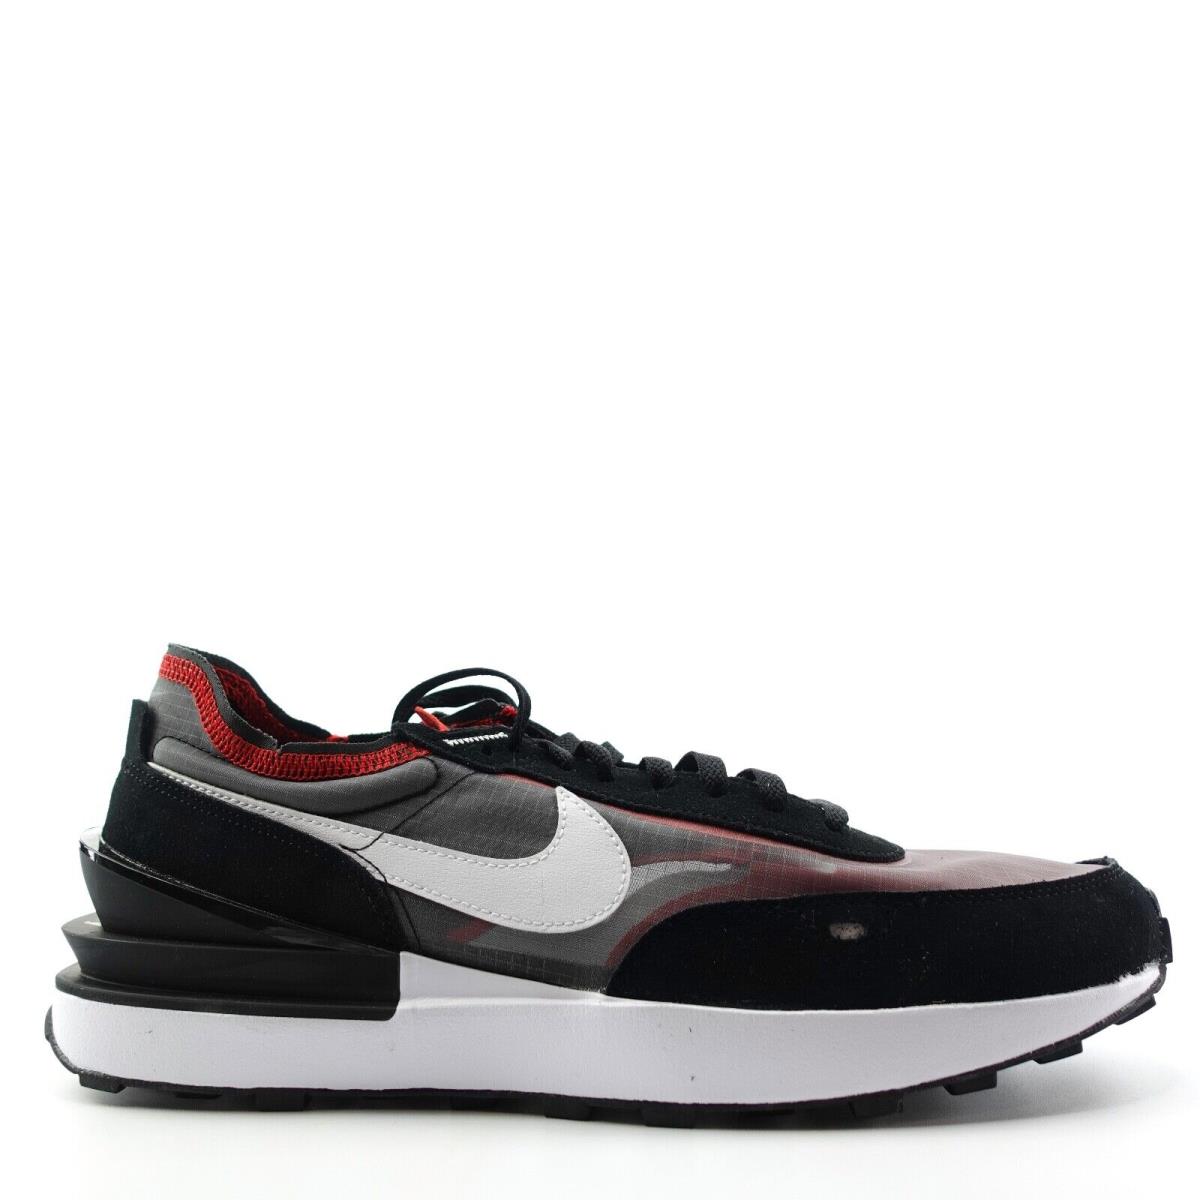 Nike Waffle One SE Black White Sport Red Shoes DD8014-001 Mens Size 11